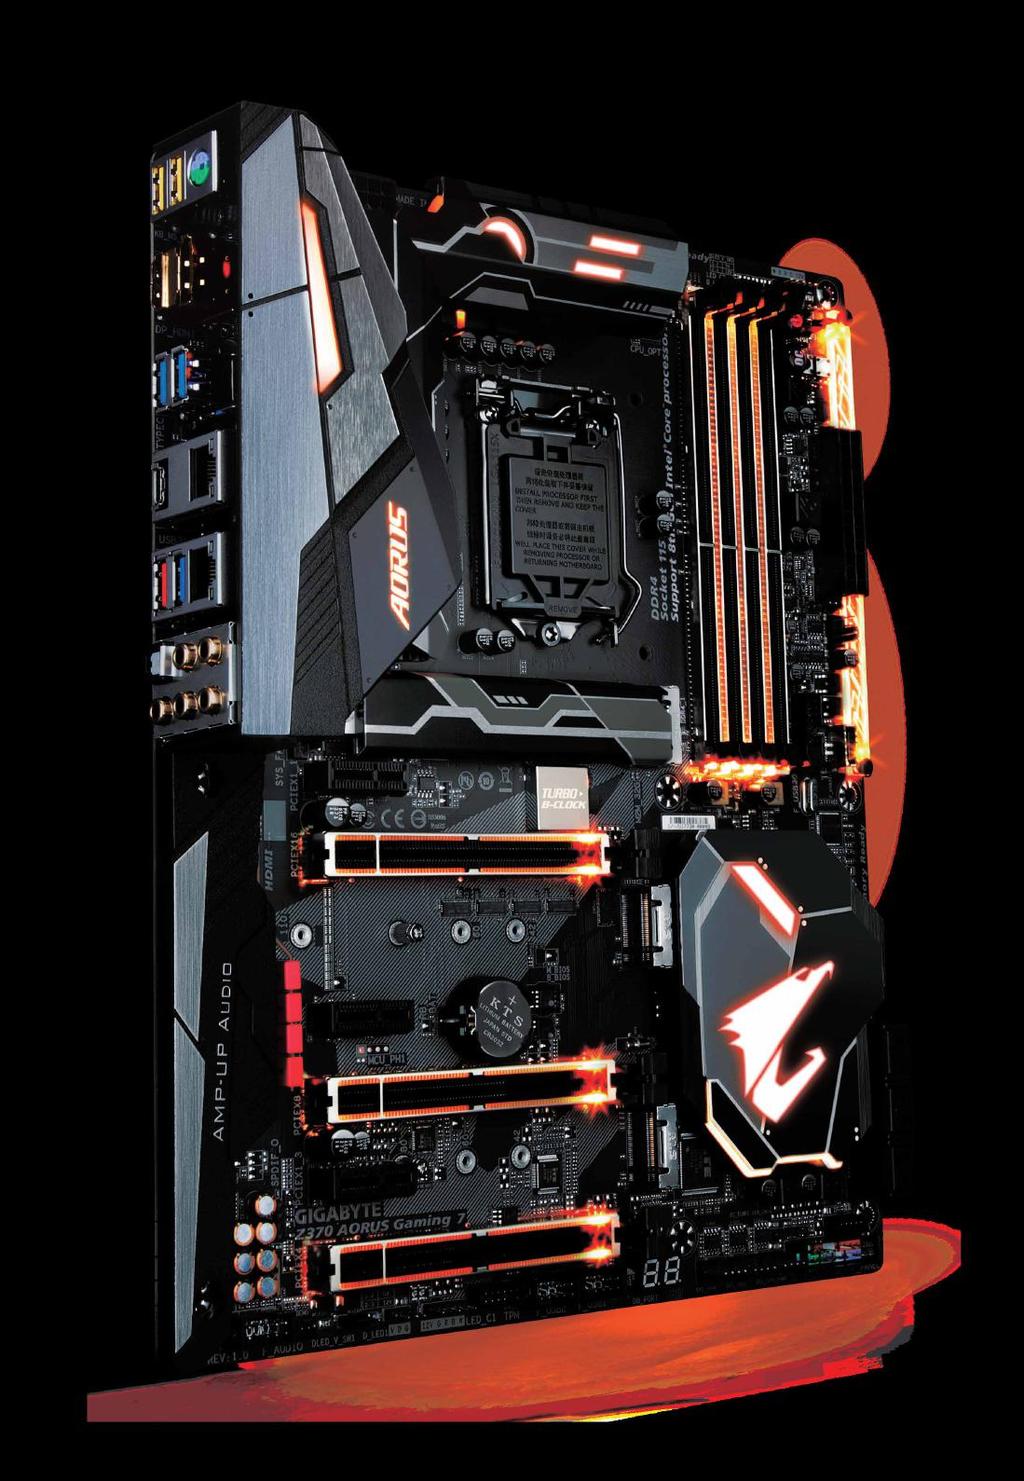 AORUS Gaming Motherboards will support either 5v or 12v digital LED lighting strips and up to 300 LED lights.